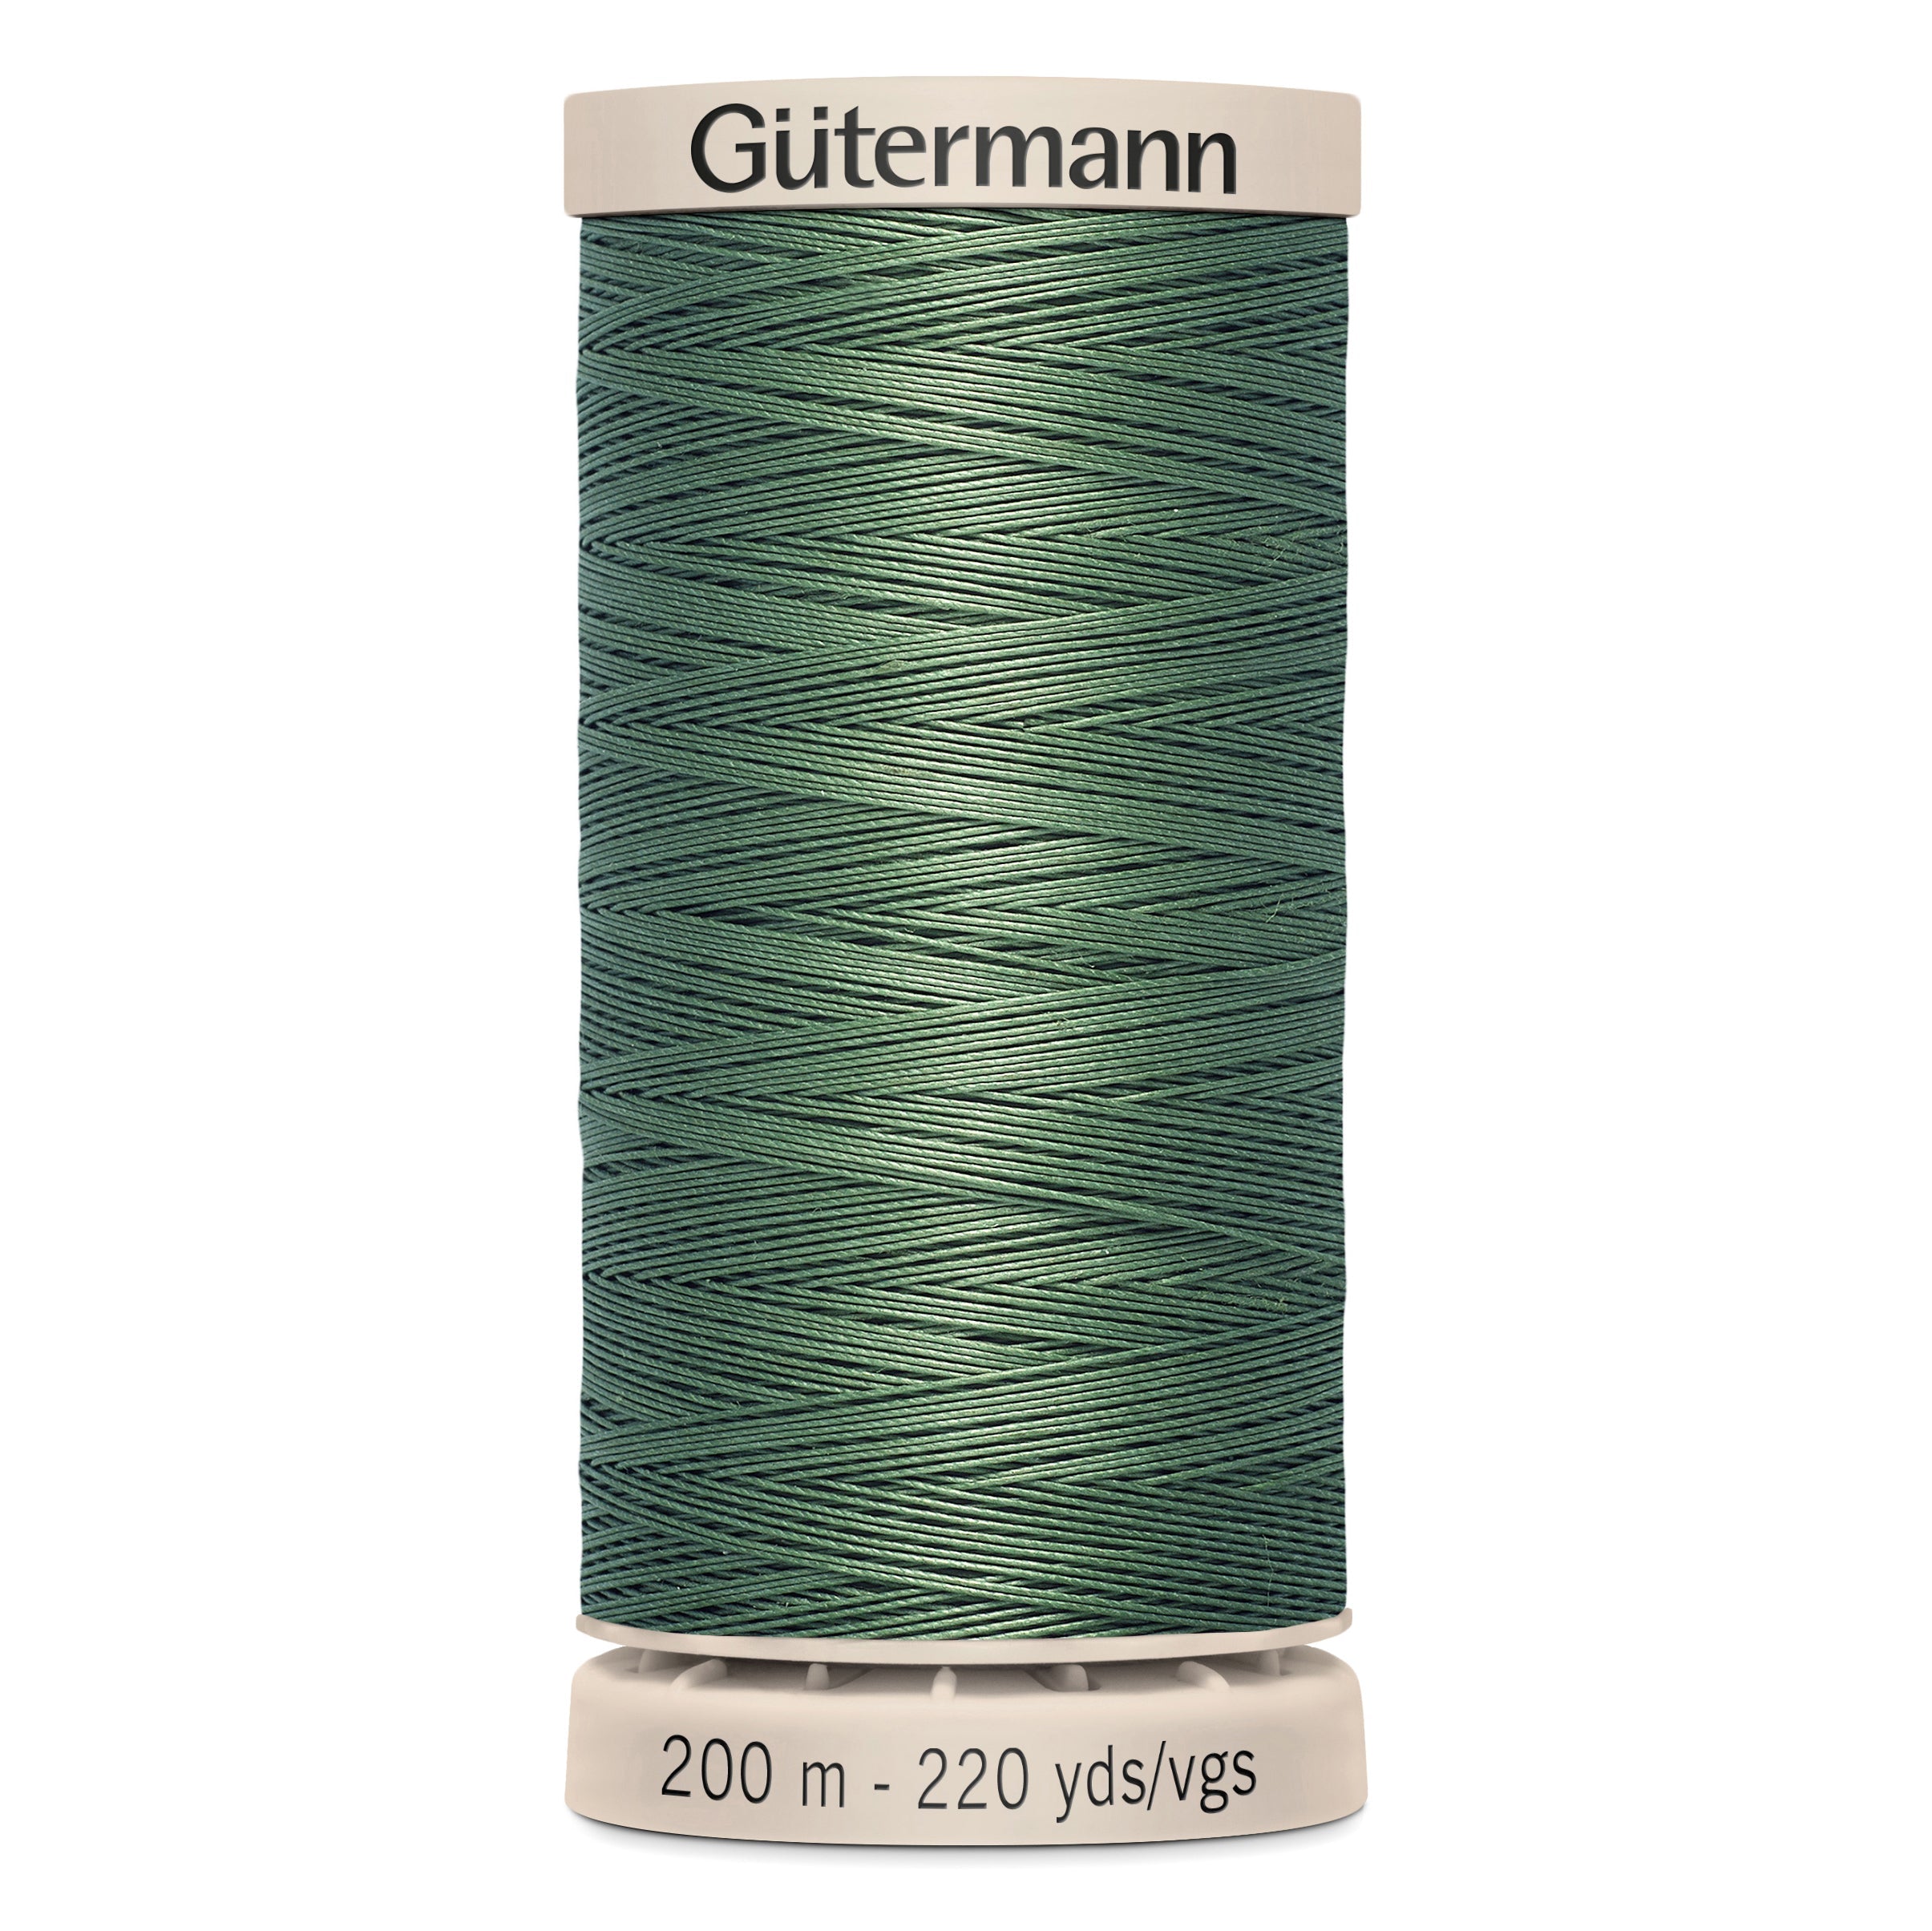 Gutermann Hand Quilting Cotton - 8724 from Jaycotts Sewing Supplies